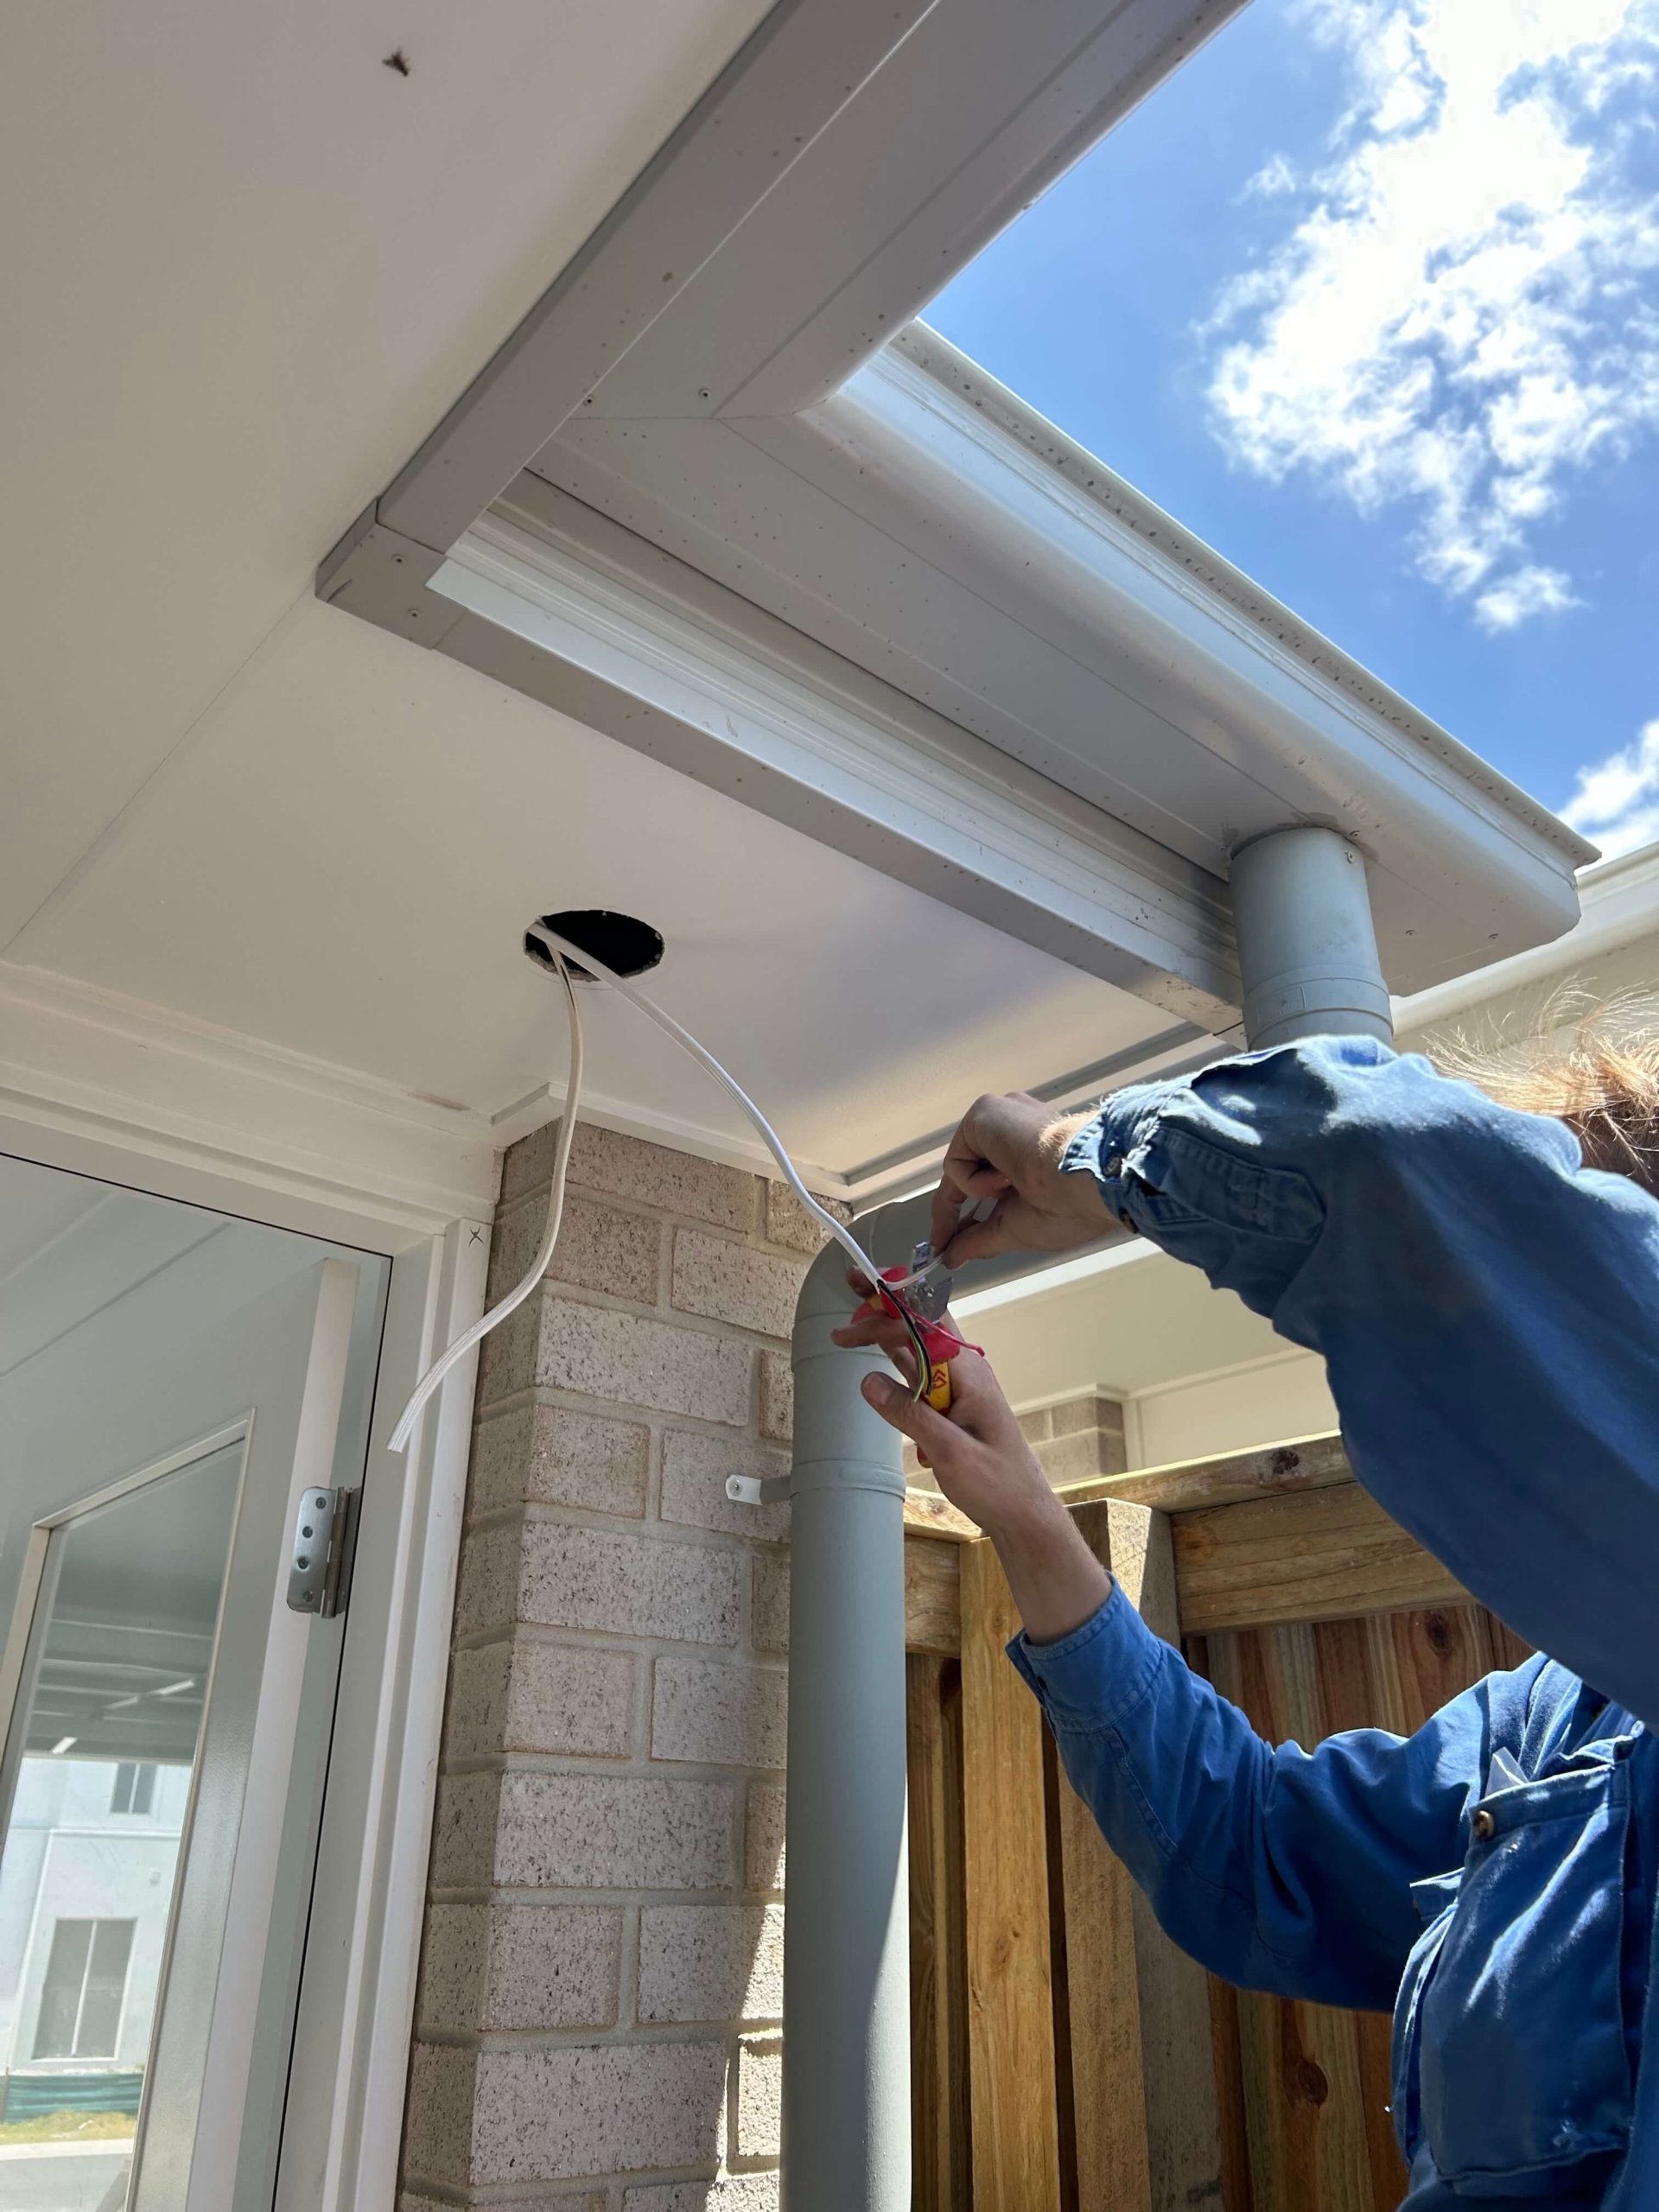 Ceiling Wire Repair - Connex Electrical Services